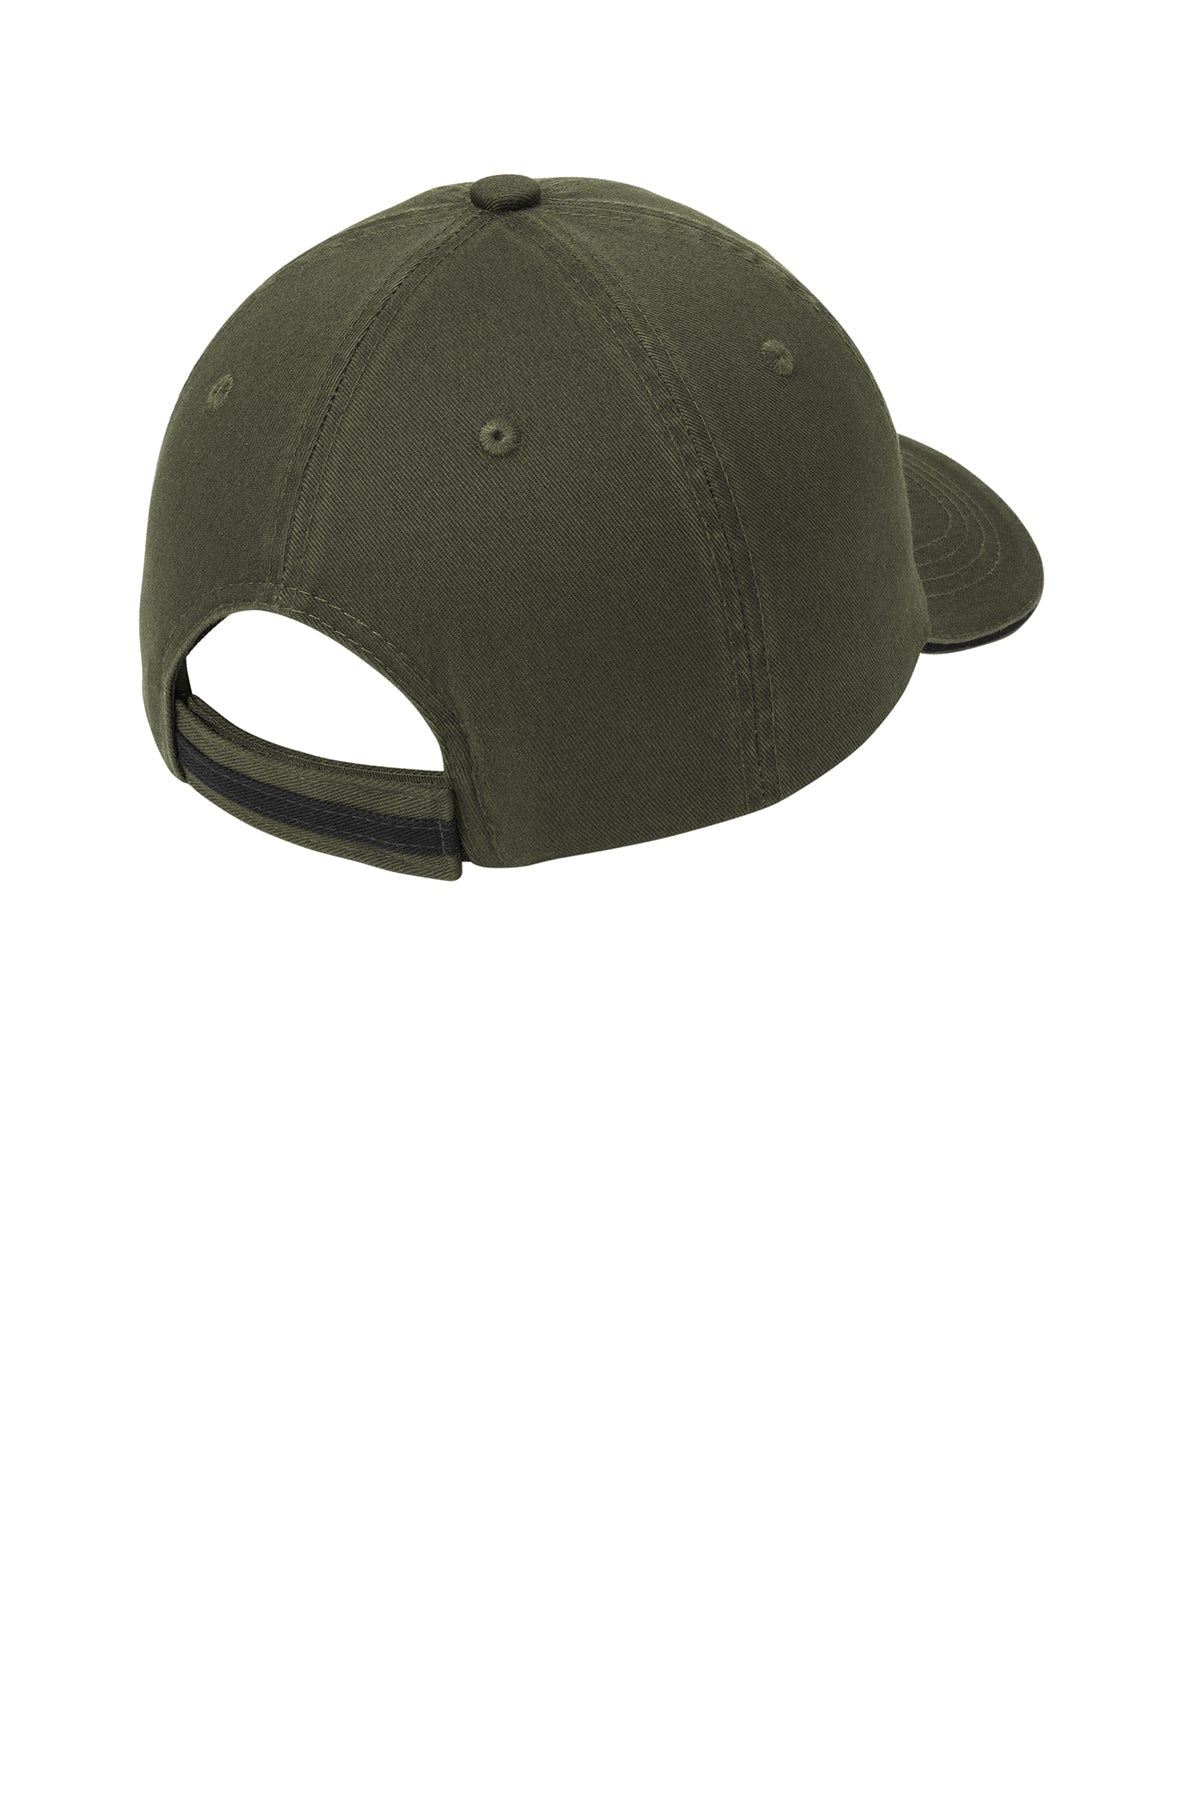 Port Authority Sandwich Bill Custom Caps with Striped Closure, Olive/ Black